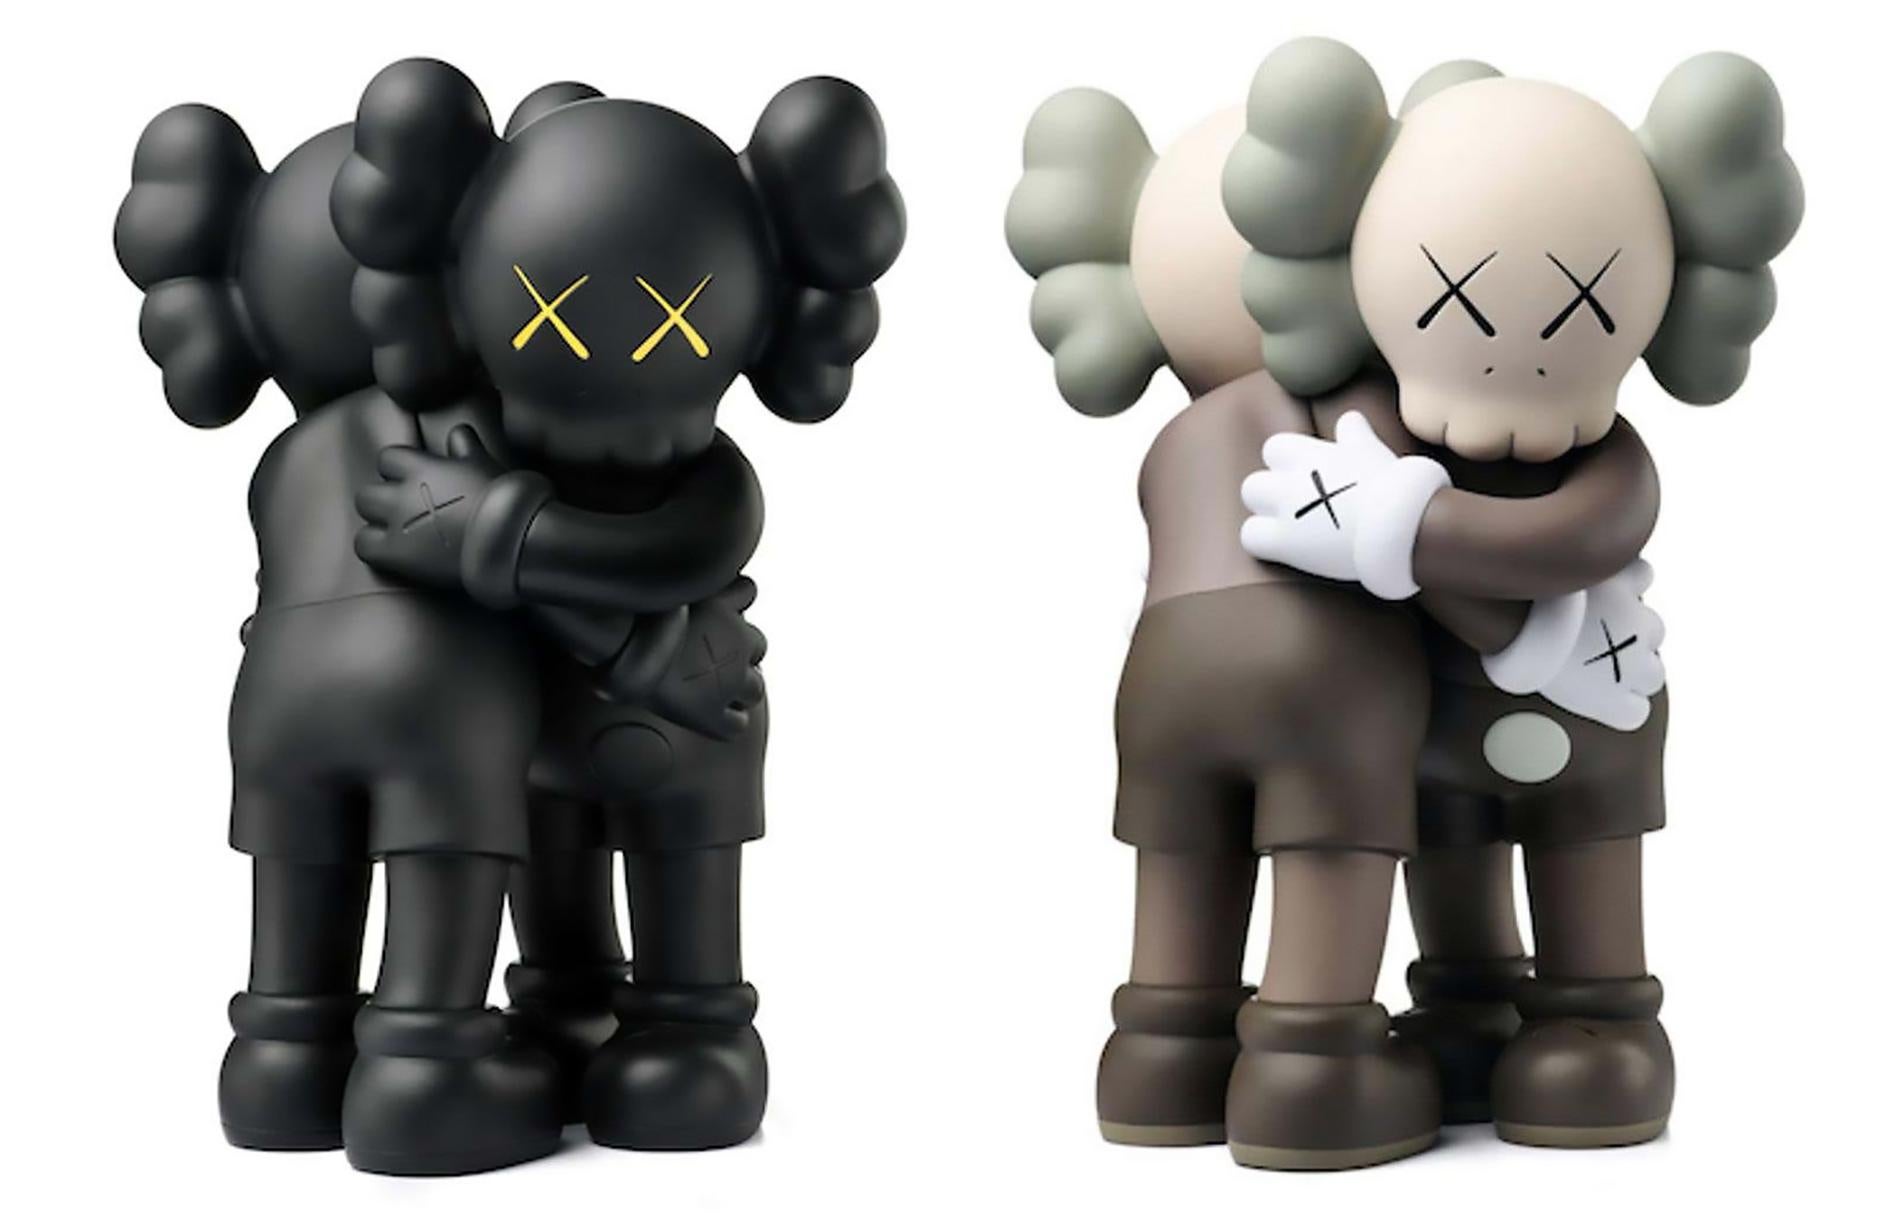 KAWS Together 2018: Set of 2 (Brown & Black):
In TOGETHER, KAWS’s iconic “Companions” are interlocked, consoling each other in an everlasting hug. KAWS 1st debuted this embracing duo in 2016, presenting large-scale wooden versions at More Gallery in